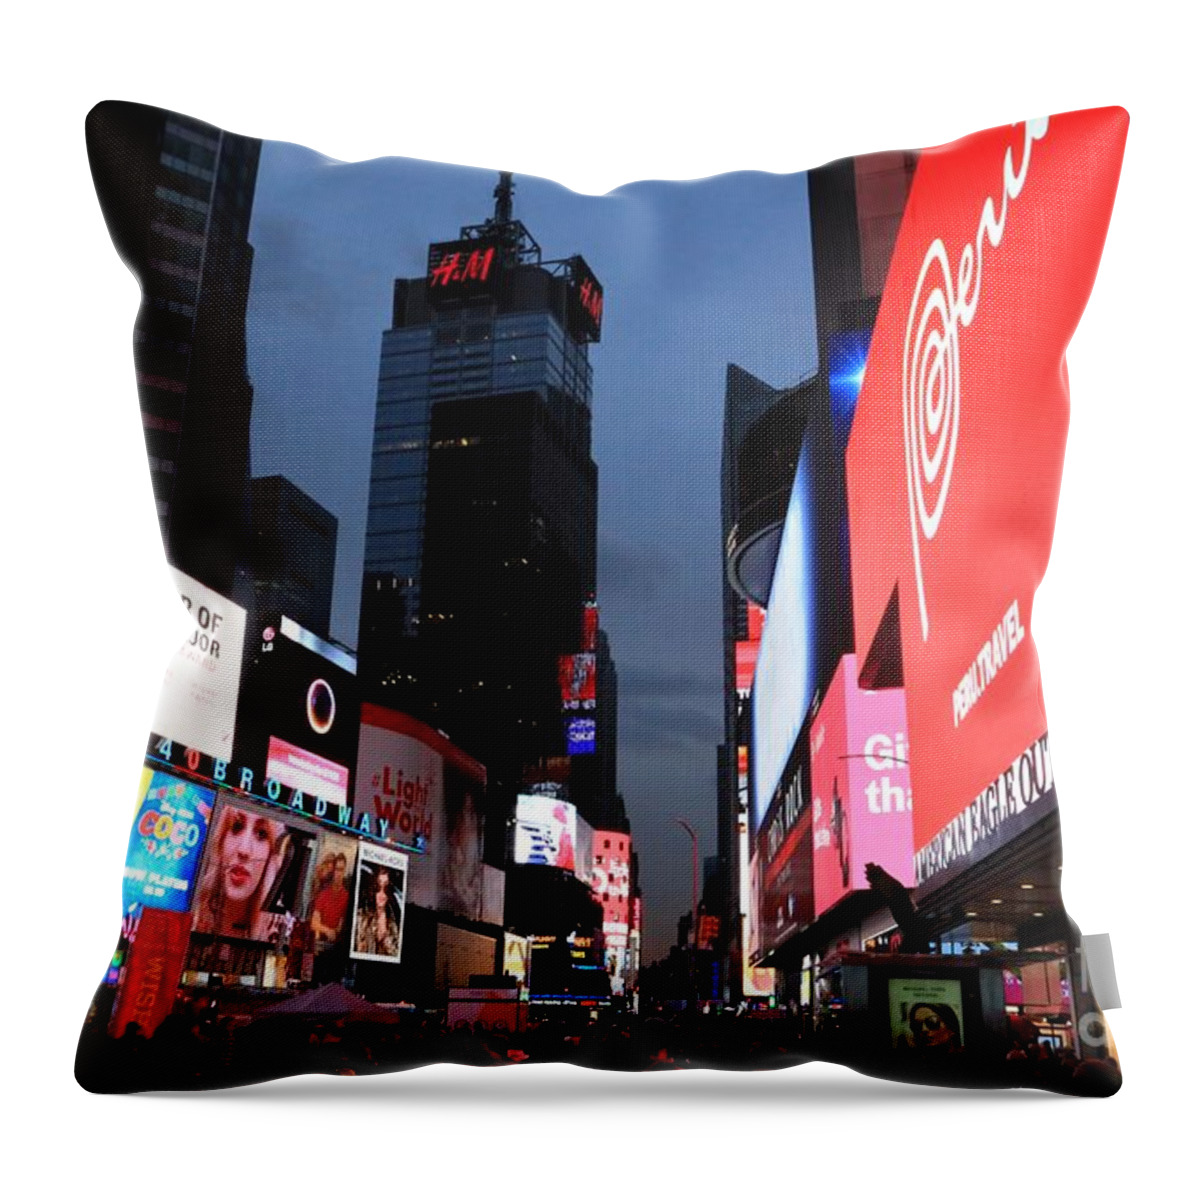 Destination Throw Pillow featuring the photograph Time Square New York City by Douglas Sacha